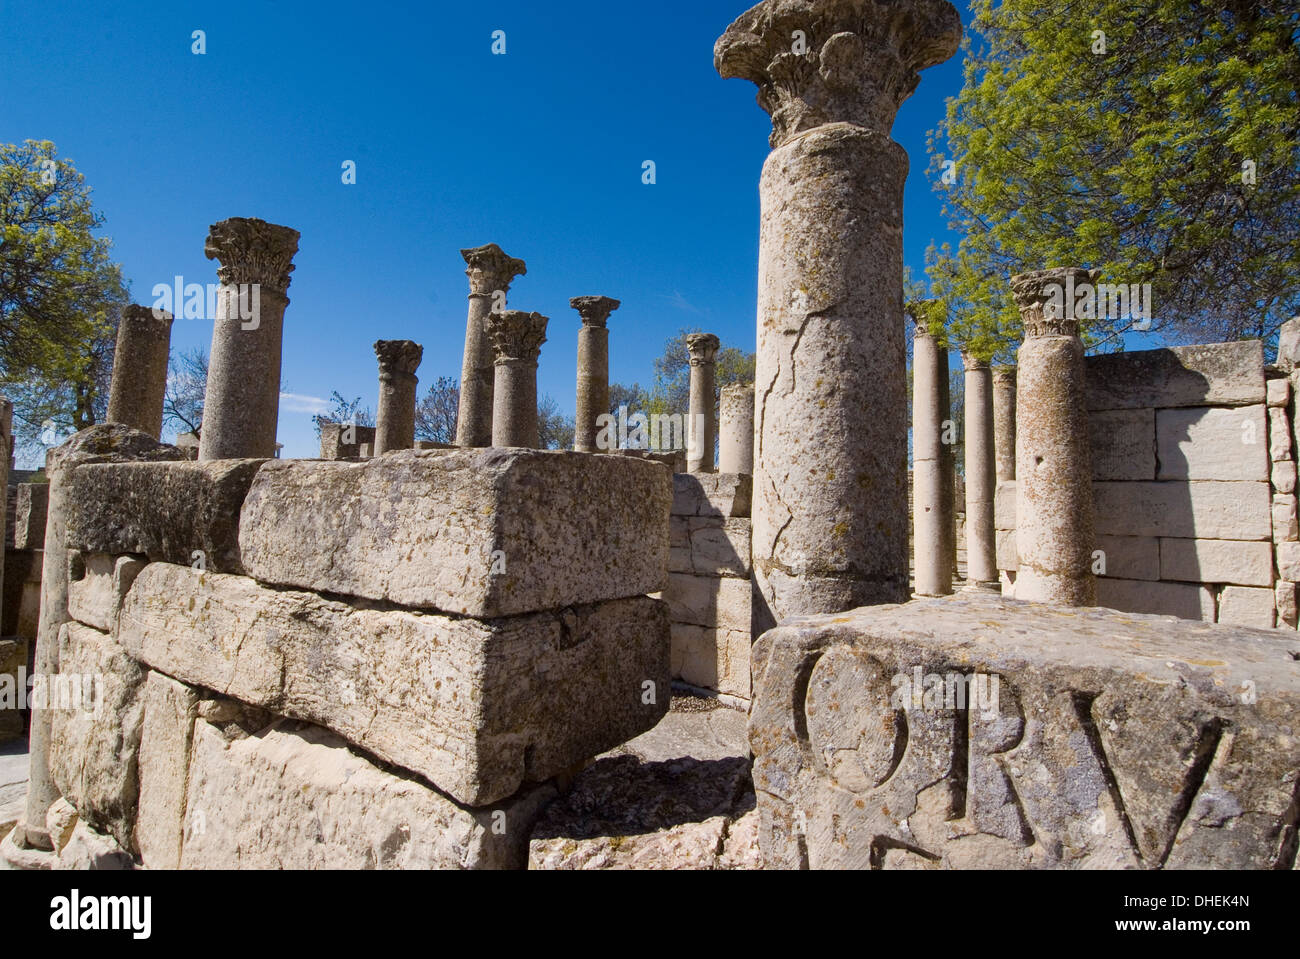 School for youths, Roman site of Makhtar, Tunisia, North Africa, Africa Stock Photo